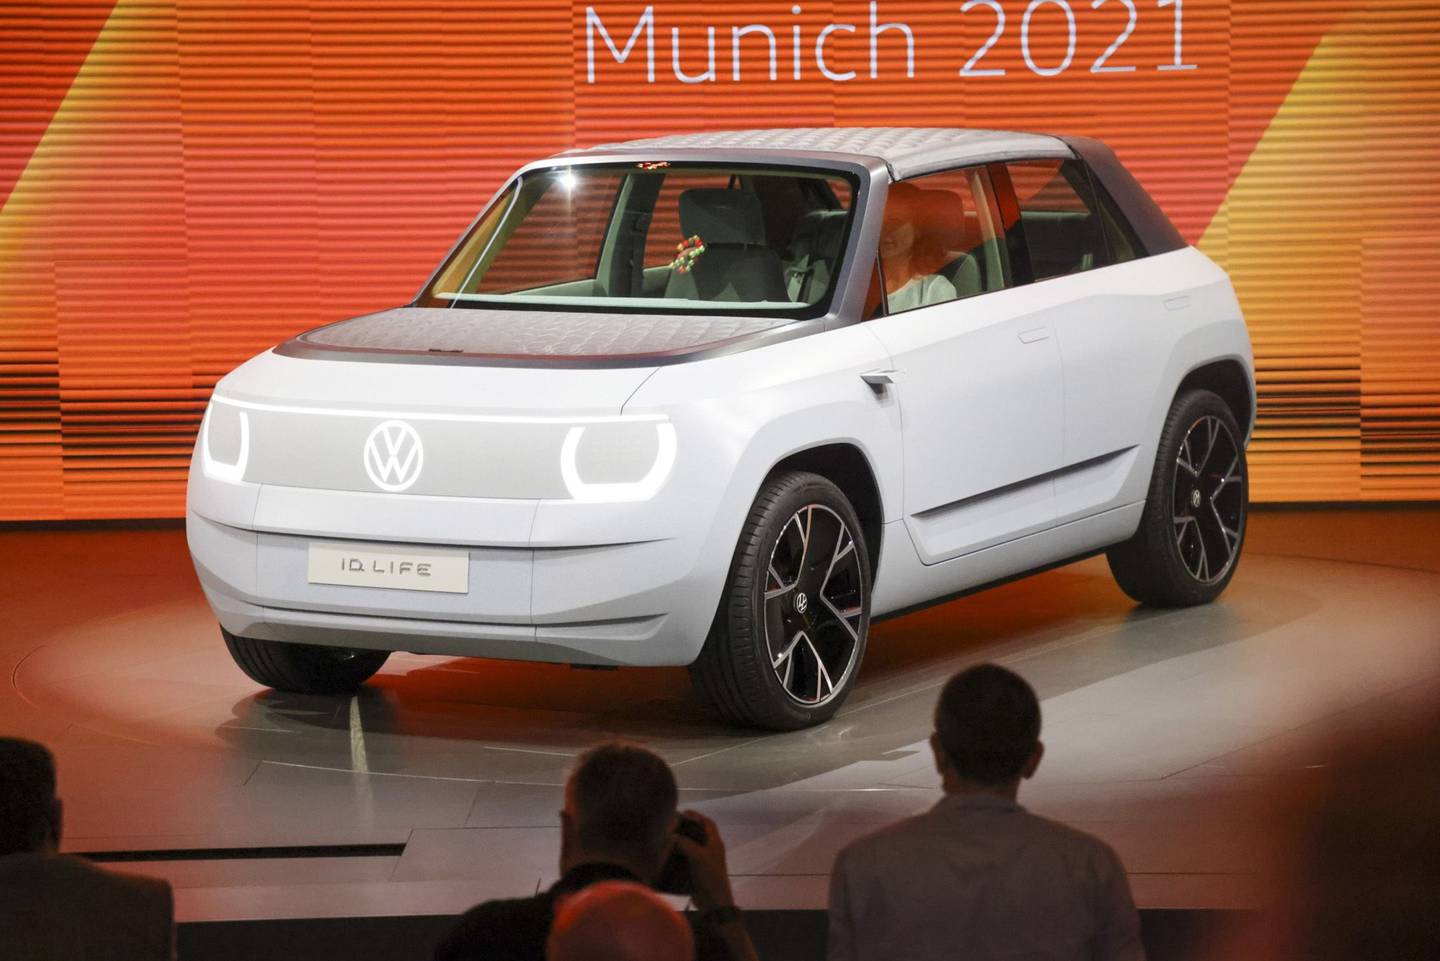 While many electric cars unveiled at the Munich show fall into the luxury segment, the Volkswagen ID.LIFE shows what entry-level electric cars might look like in 10 years. The concept provides a preview of an ID model in the small car segment that we will be launching in 2025, priced at around 20,000 [$23,600]. This means we are making electric mobility accessible to even more people, said Ralf Brandstaetter, CEO of the Volkswagen brand.  Photographer: Alex Kraus/Bloombergdfd